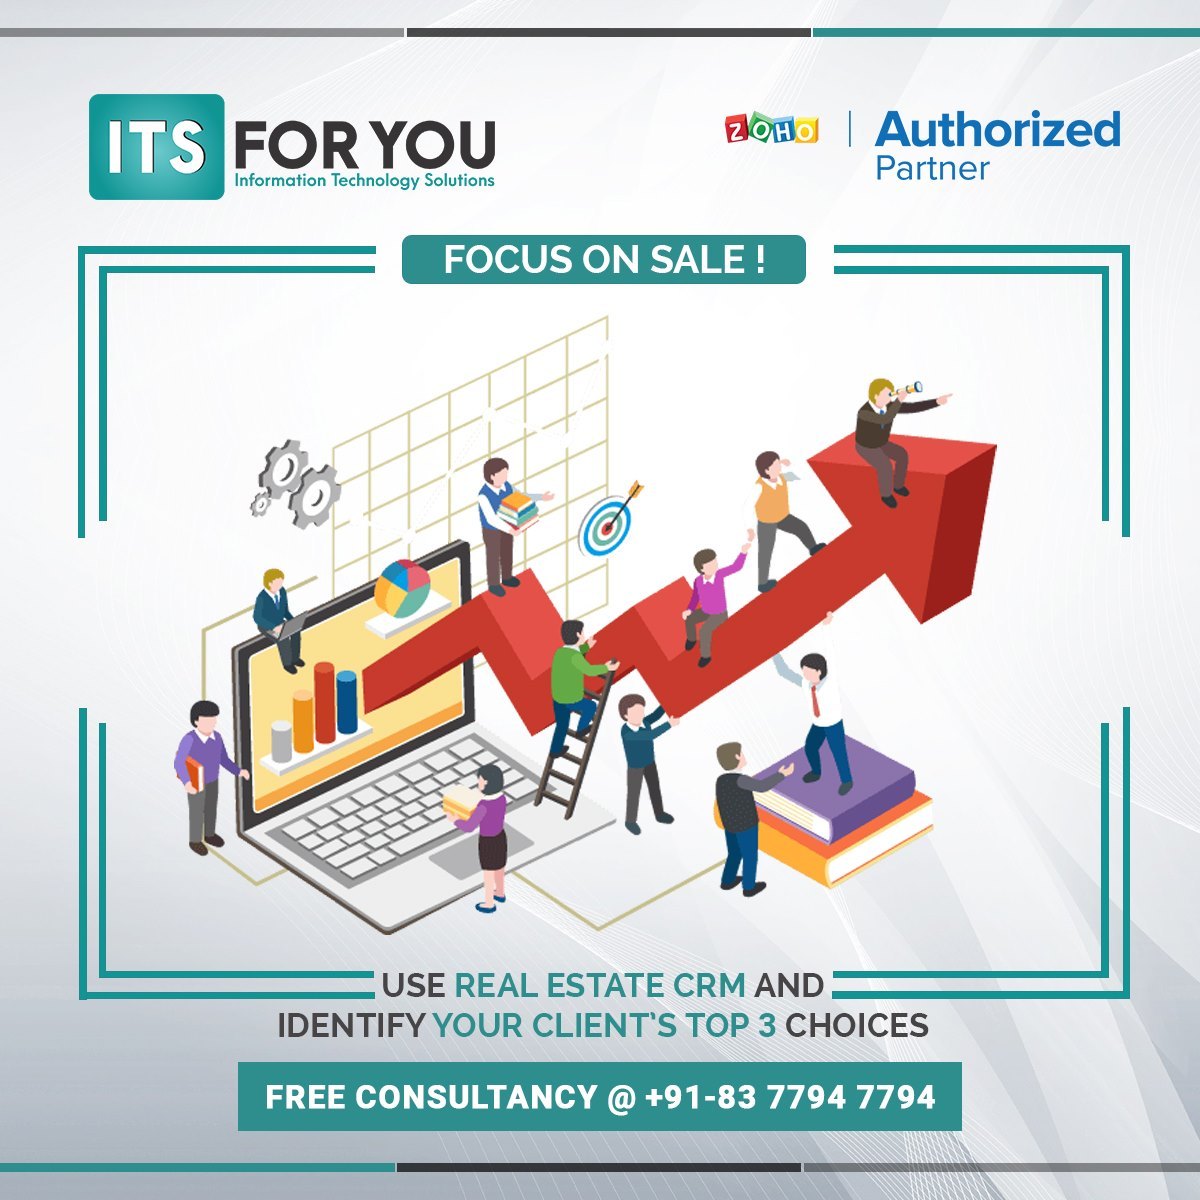 ITS FOR YOU - Technology Service Provider in India - Genuine Software for Real Estate Agents and Developers - Genuine Software for Real Estate Agents and...